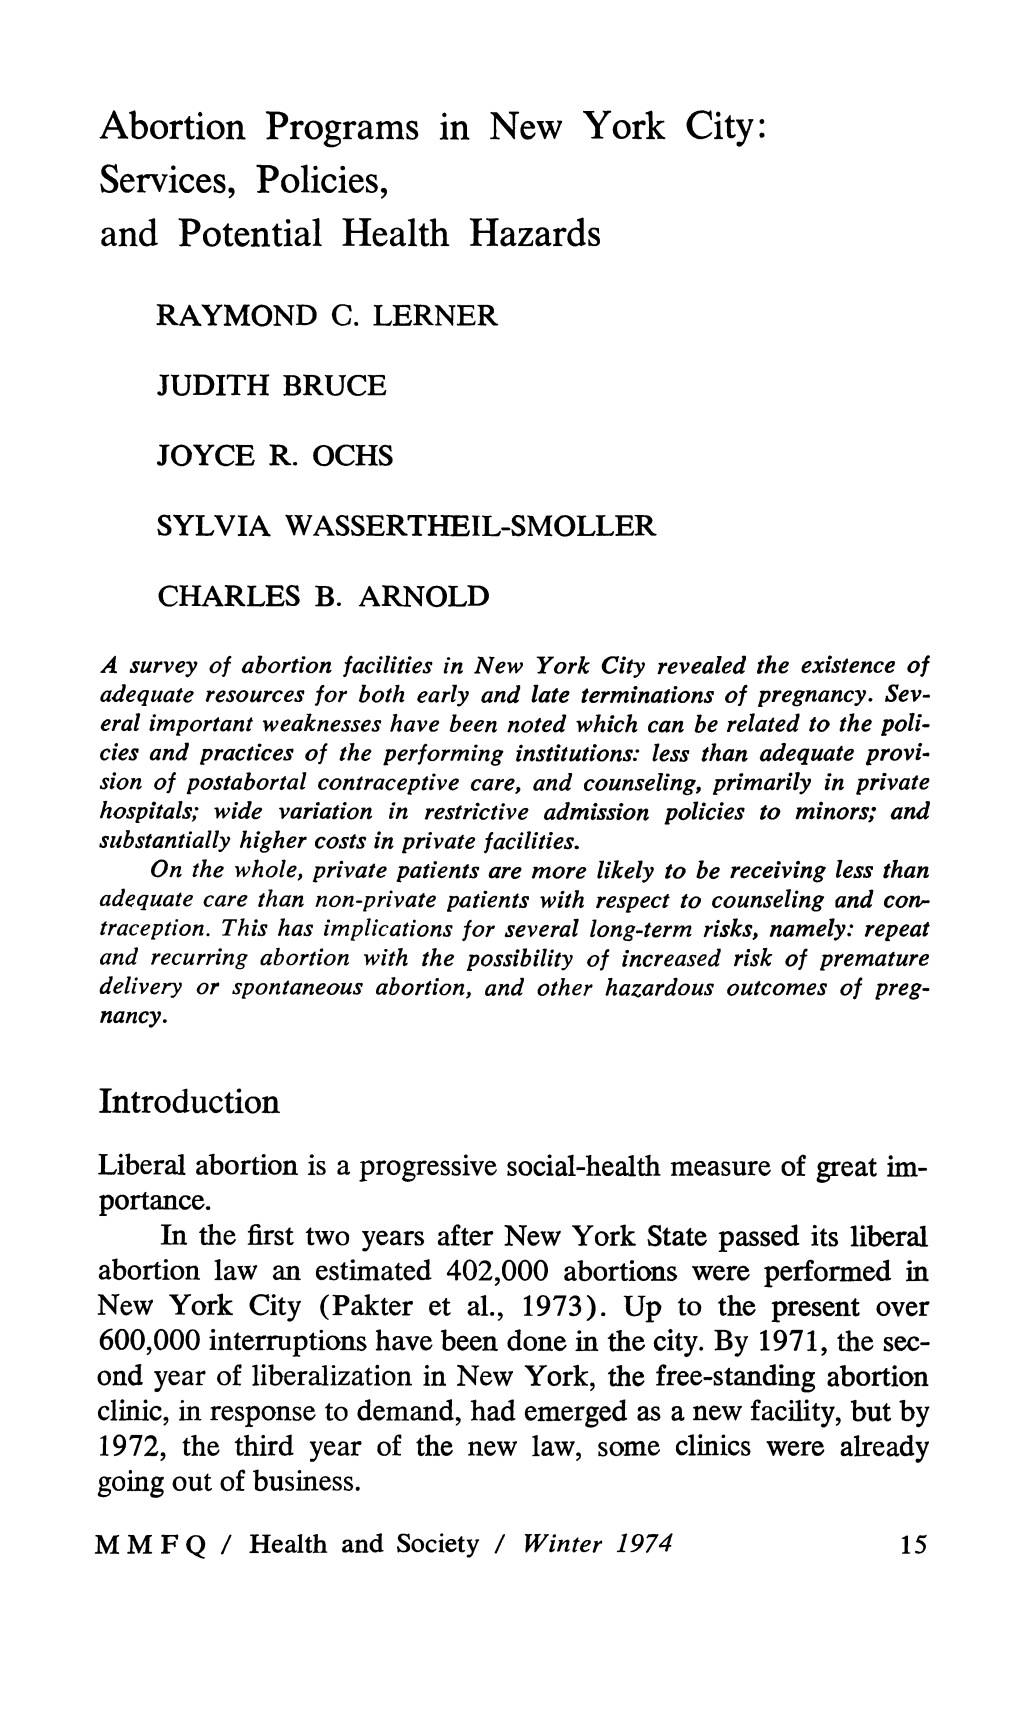 Abortion Programs in New York City: Services, Policies, and Potential Health Hazards